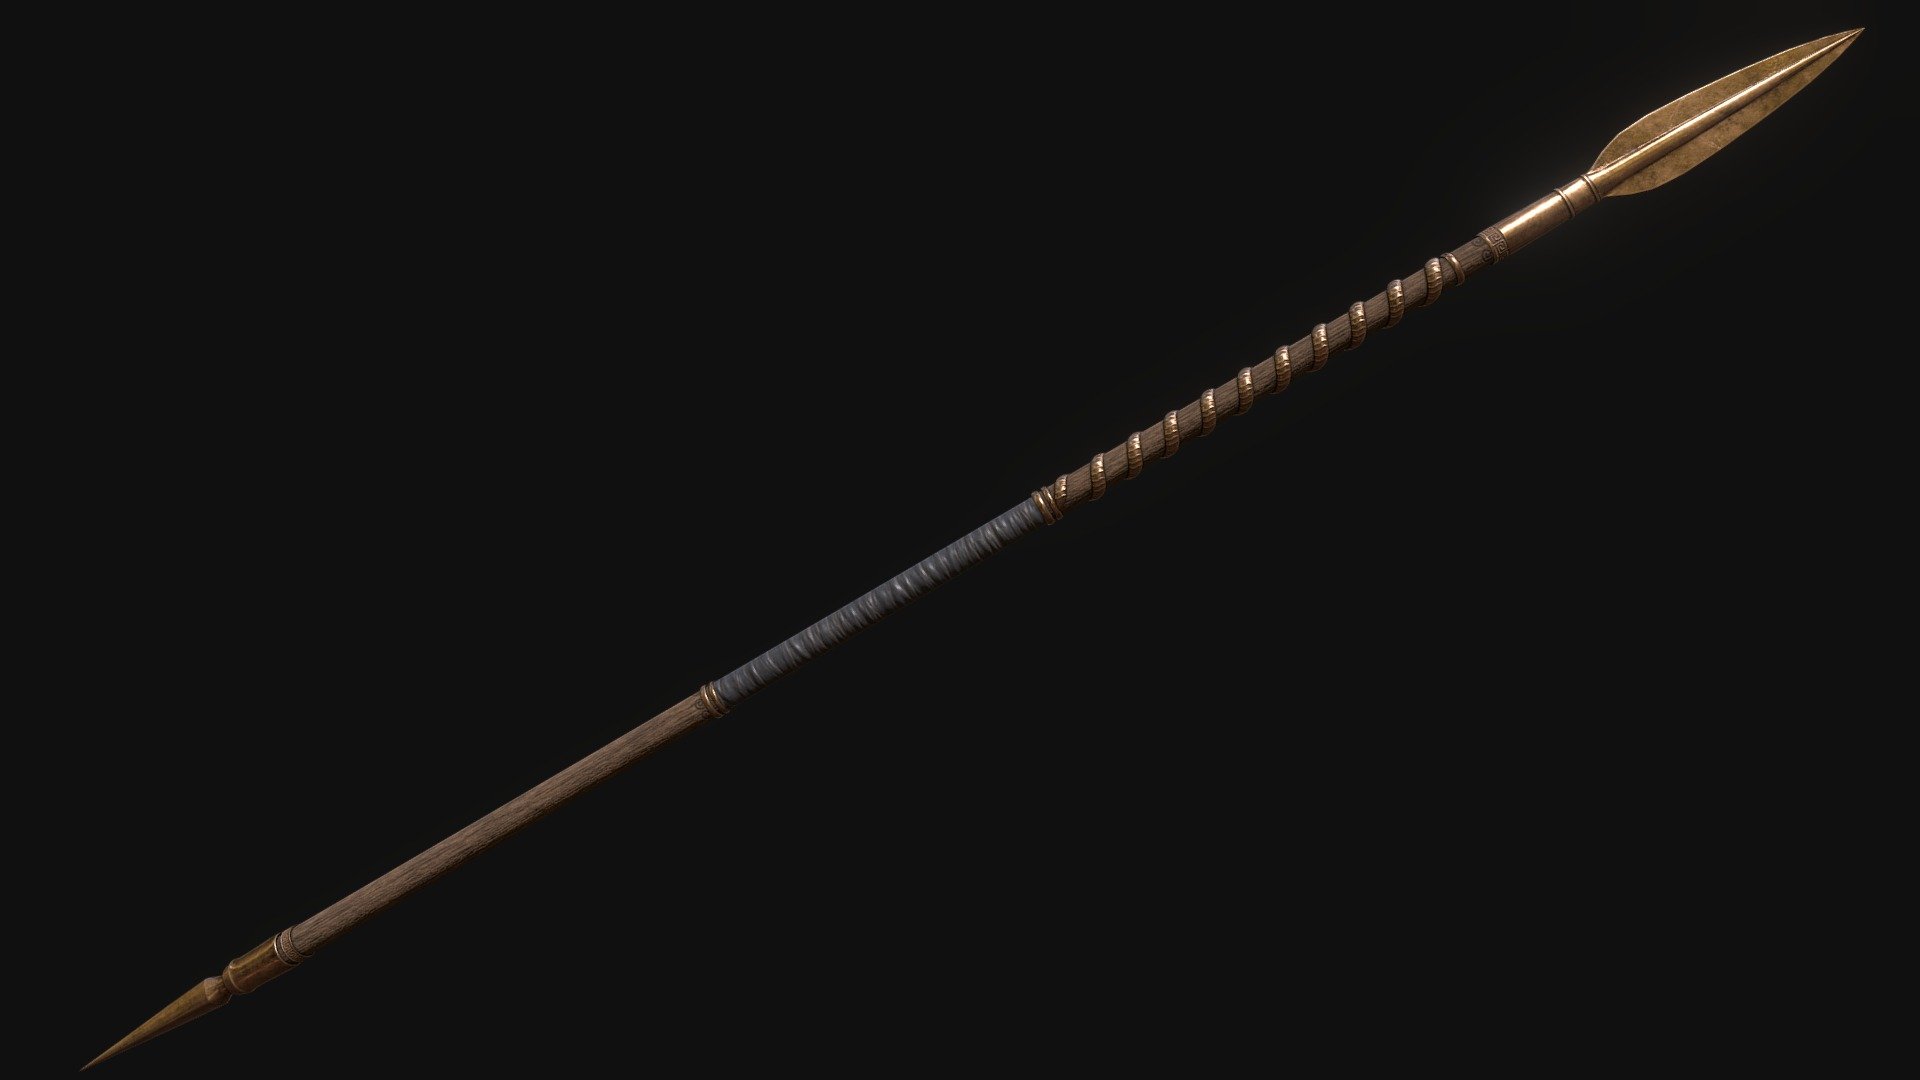 Bronze Greek Spear  - Dory

Textures in 4k, FBX file format.

Modeled in Blender, textured in Substance.

Visit my Artstation for more renders and option to buy

Like, follow and stay tuned for more models!
 - Bronze Greek Spear (Dory) - 3D model by burning_umbrella (@burningumbrella69) 3d model